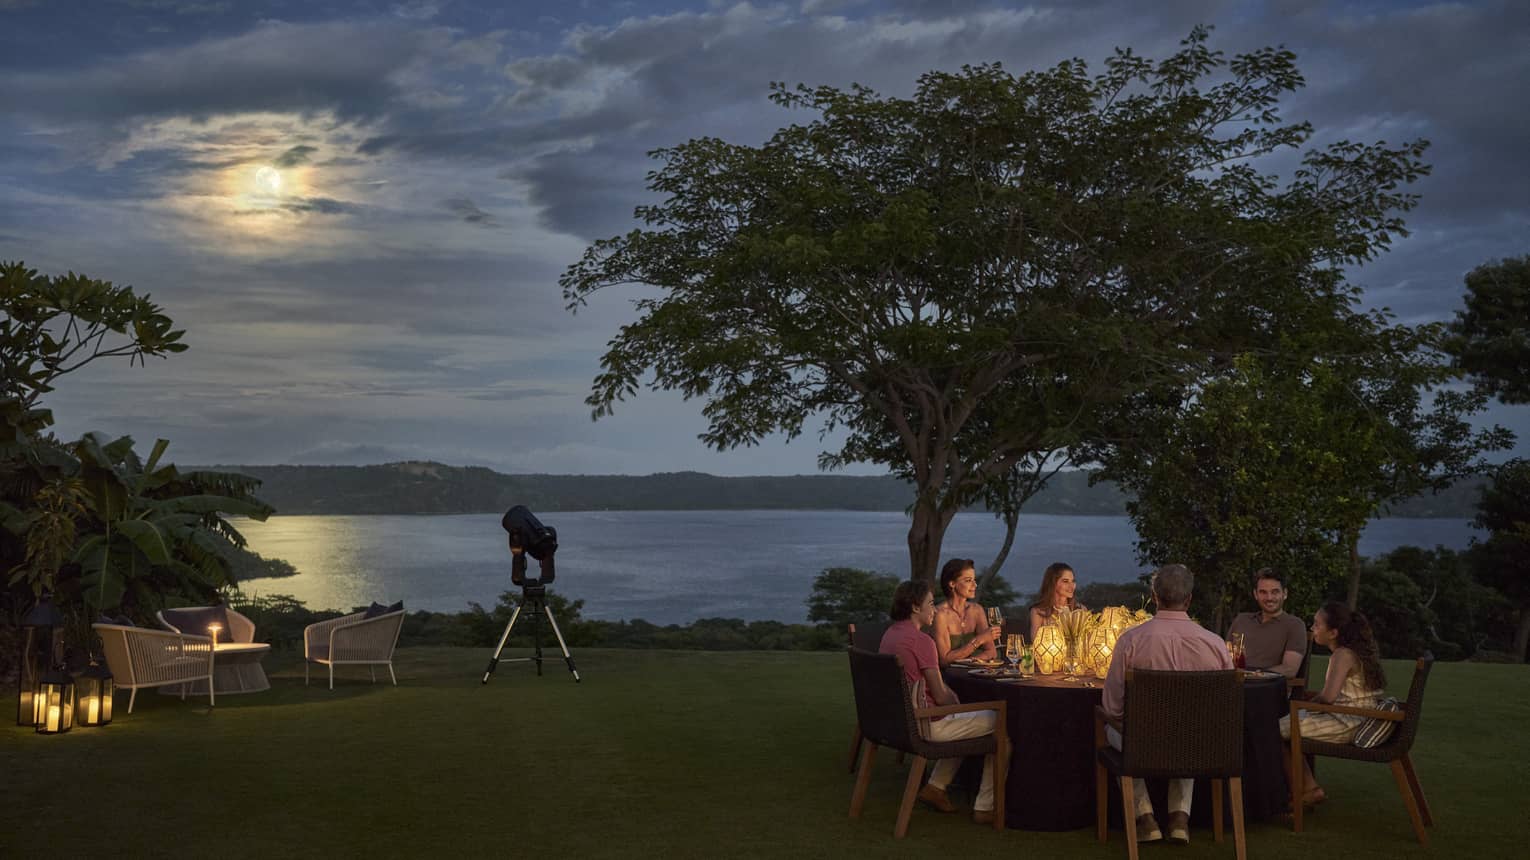 Under a golden moon, a group of diners enjoy a candlelit dinner in a clearing amid trees, a telescope positioned nearby.